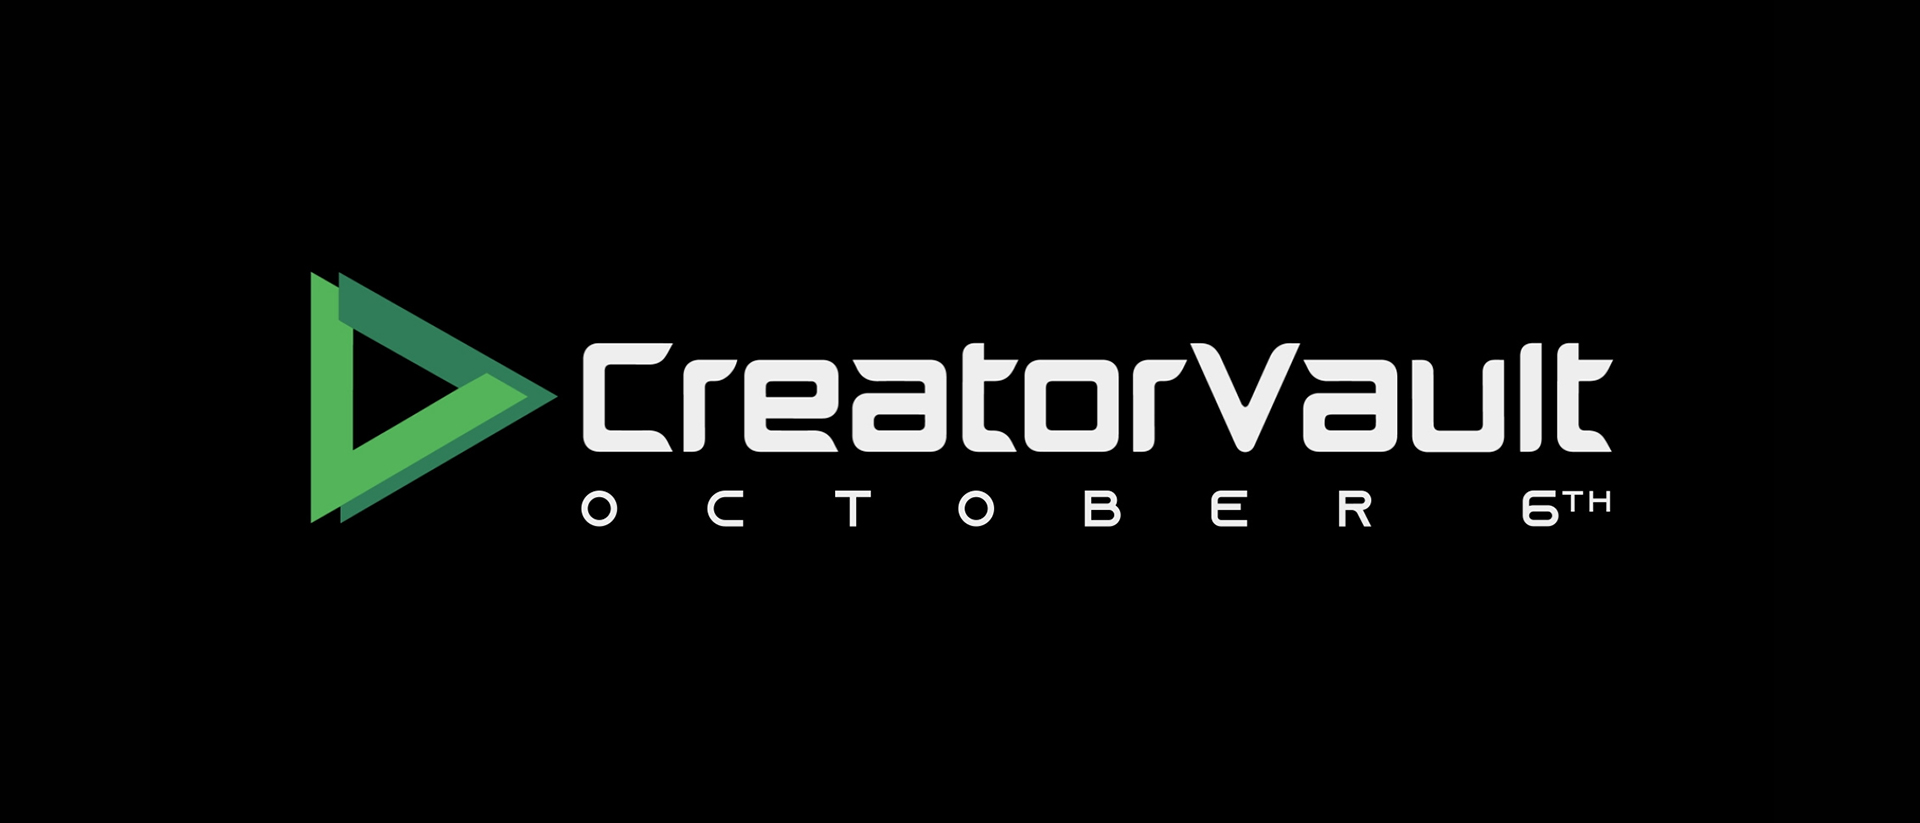 What's inside CreatorVault? Everything You Need To Know